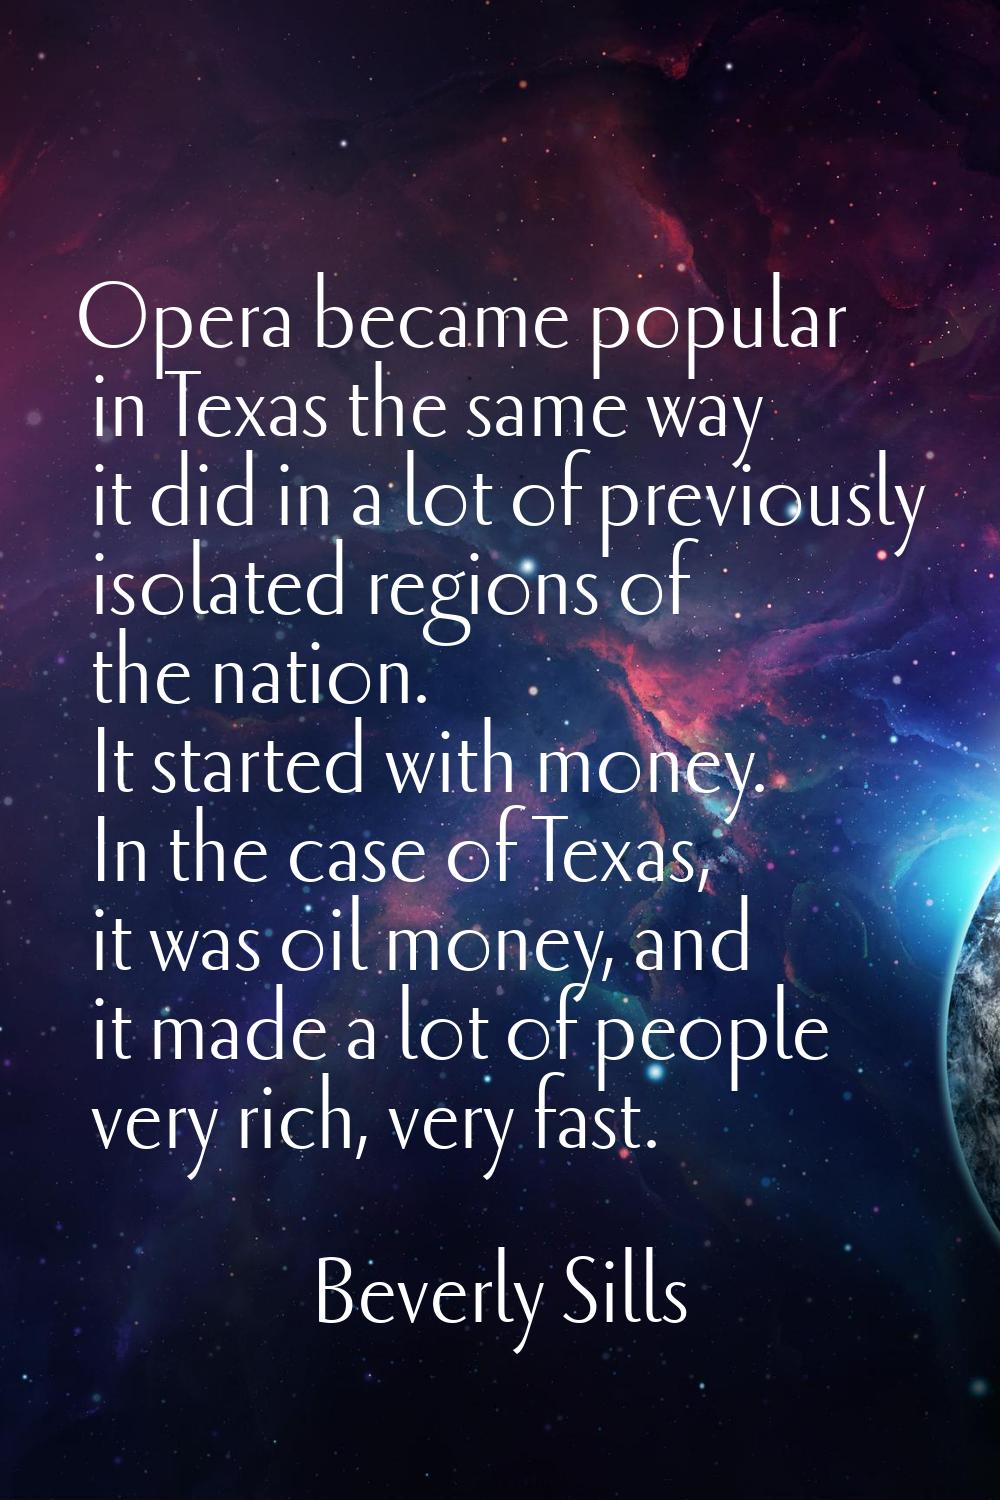 Opera became popular in Texas the same way it did in a lot of previously isolated regions of the na